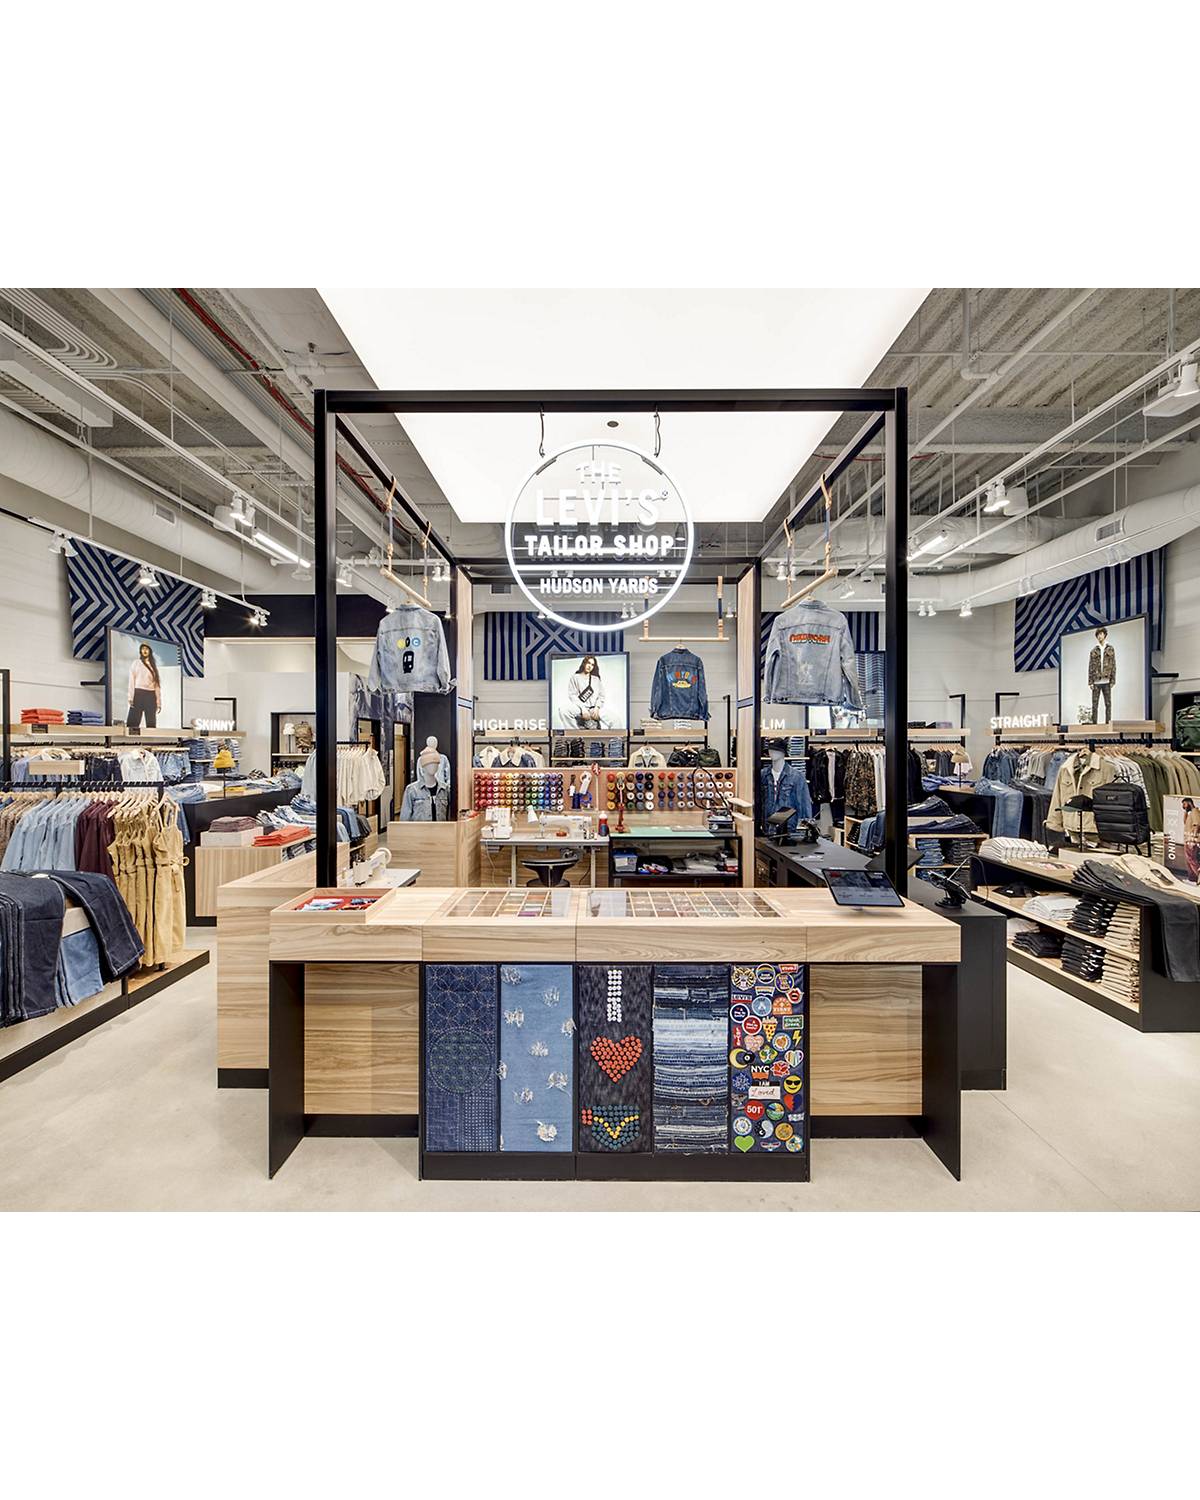 Shot of inside of Levi's store